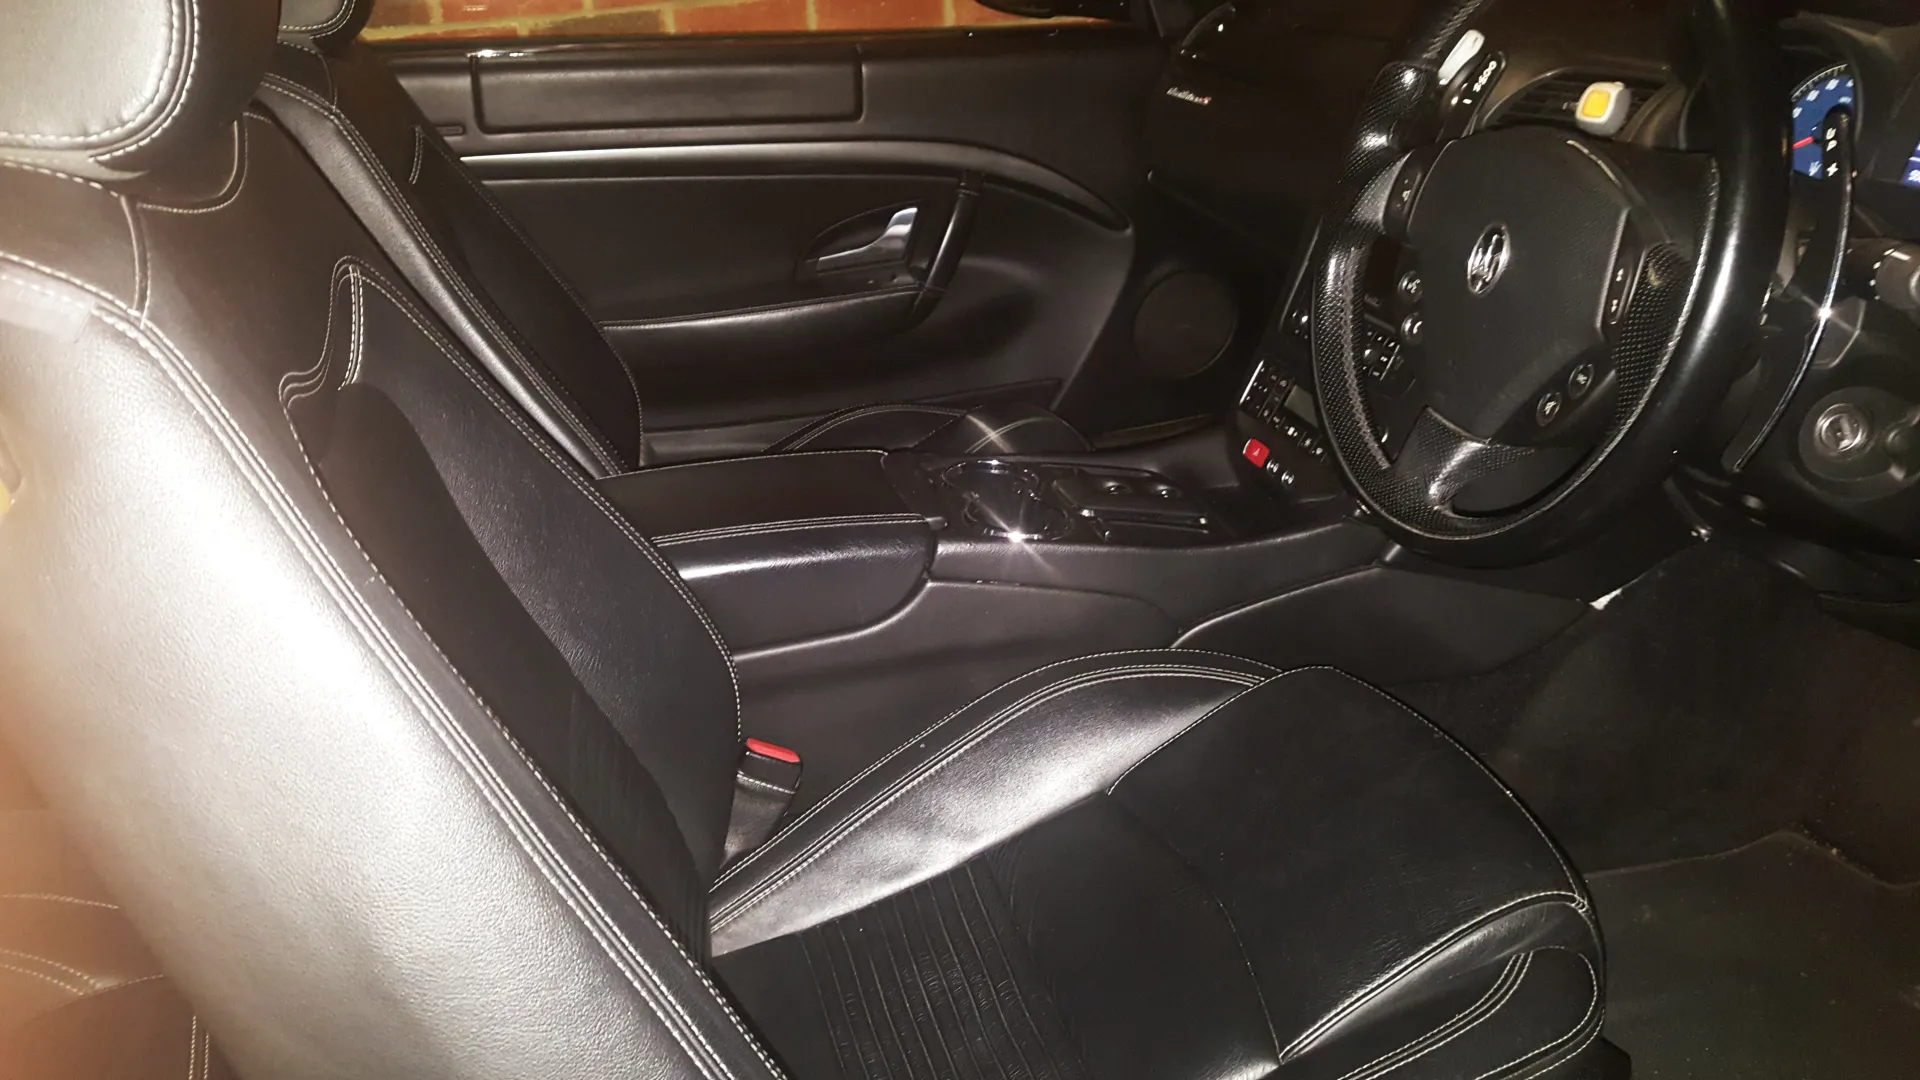 Driver Seating area in Maserati with black leather interior